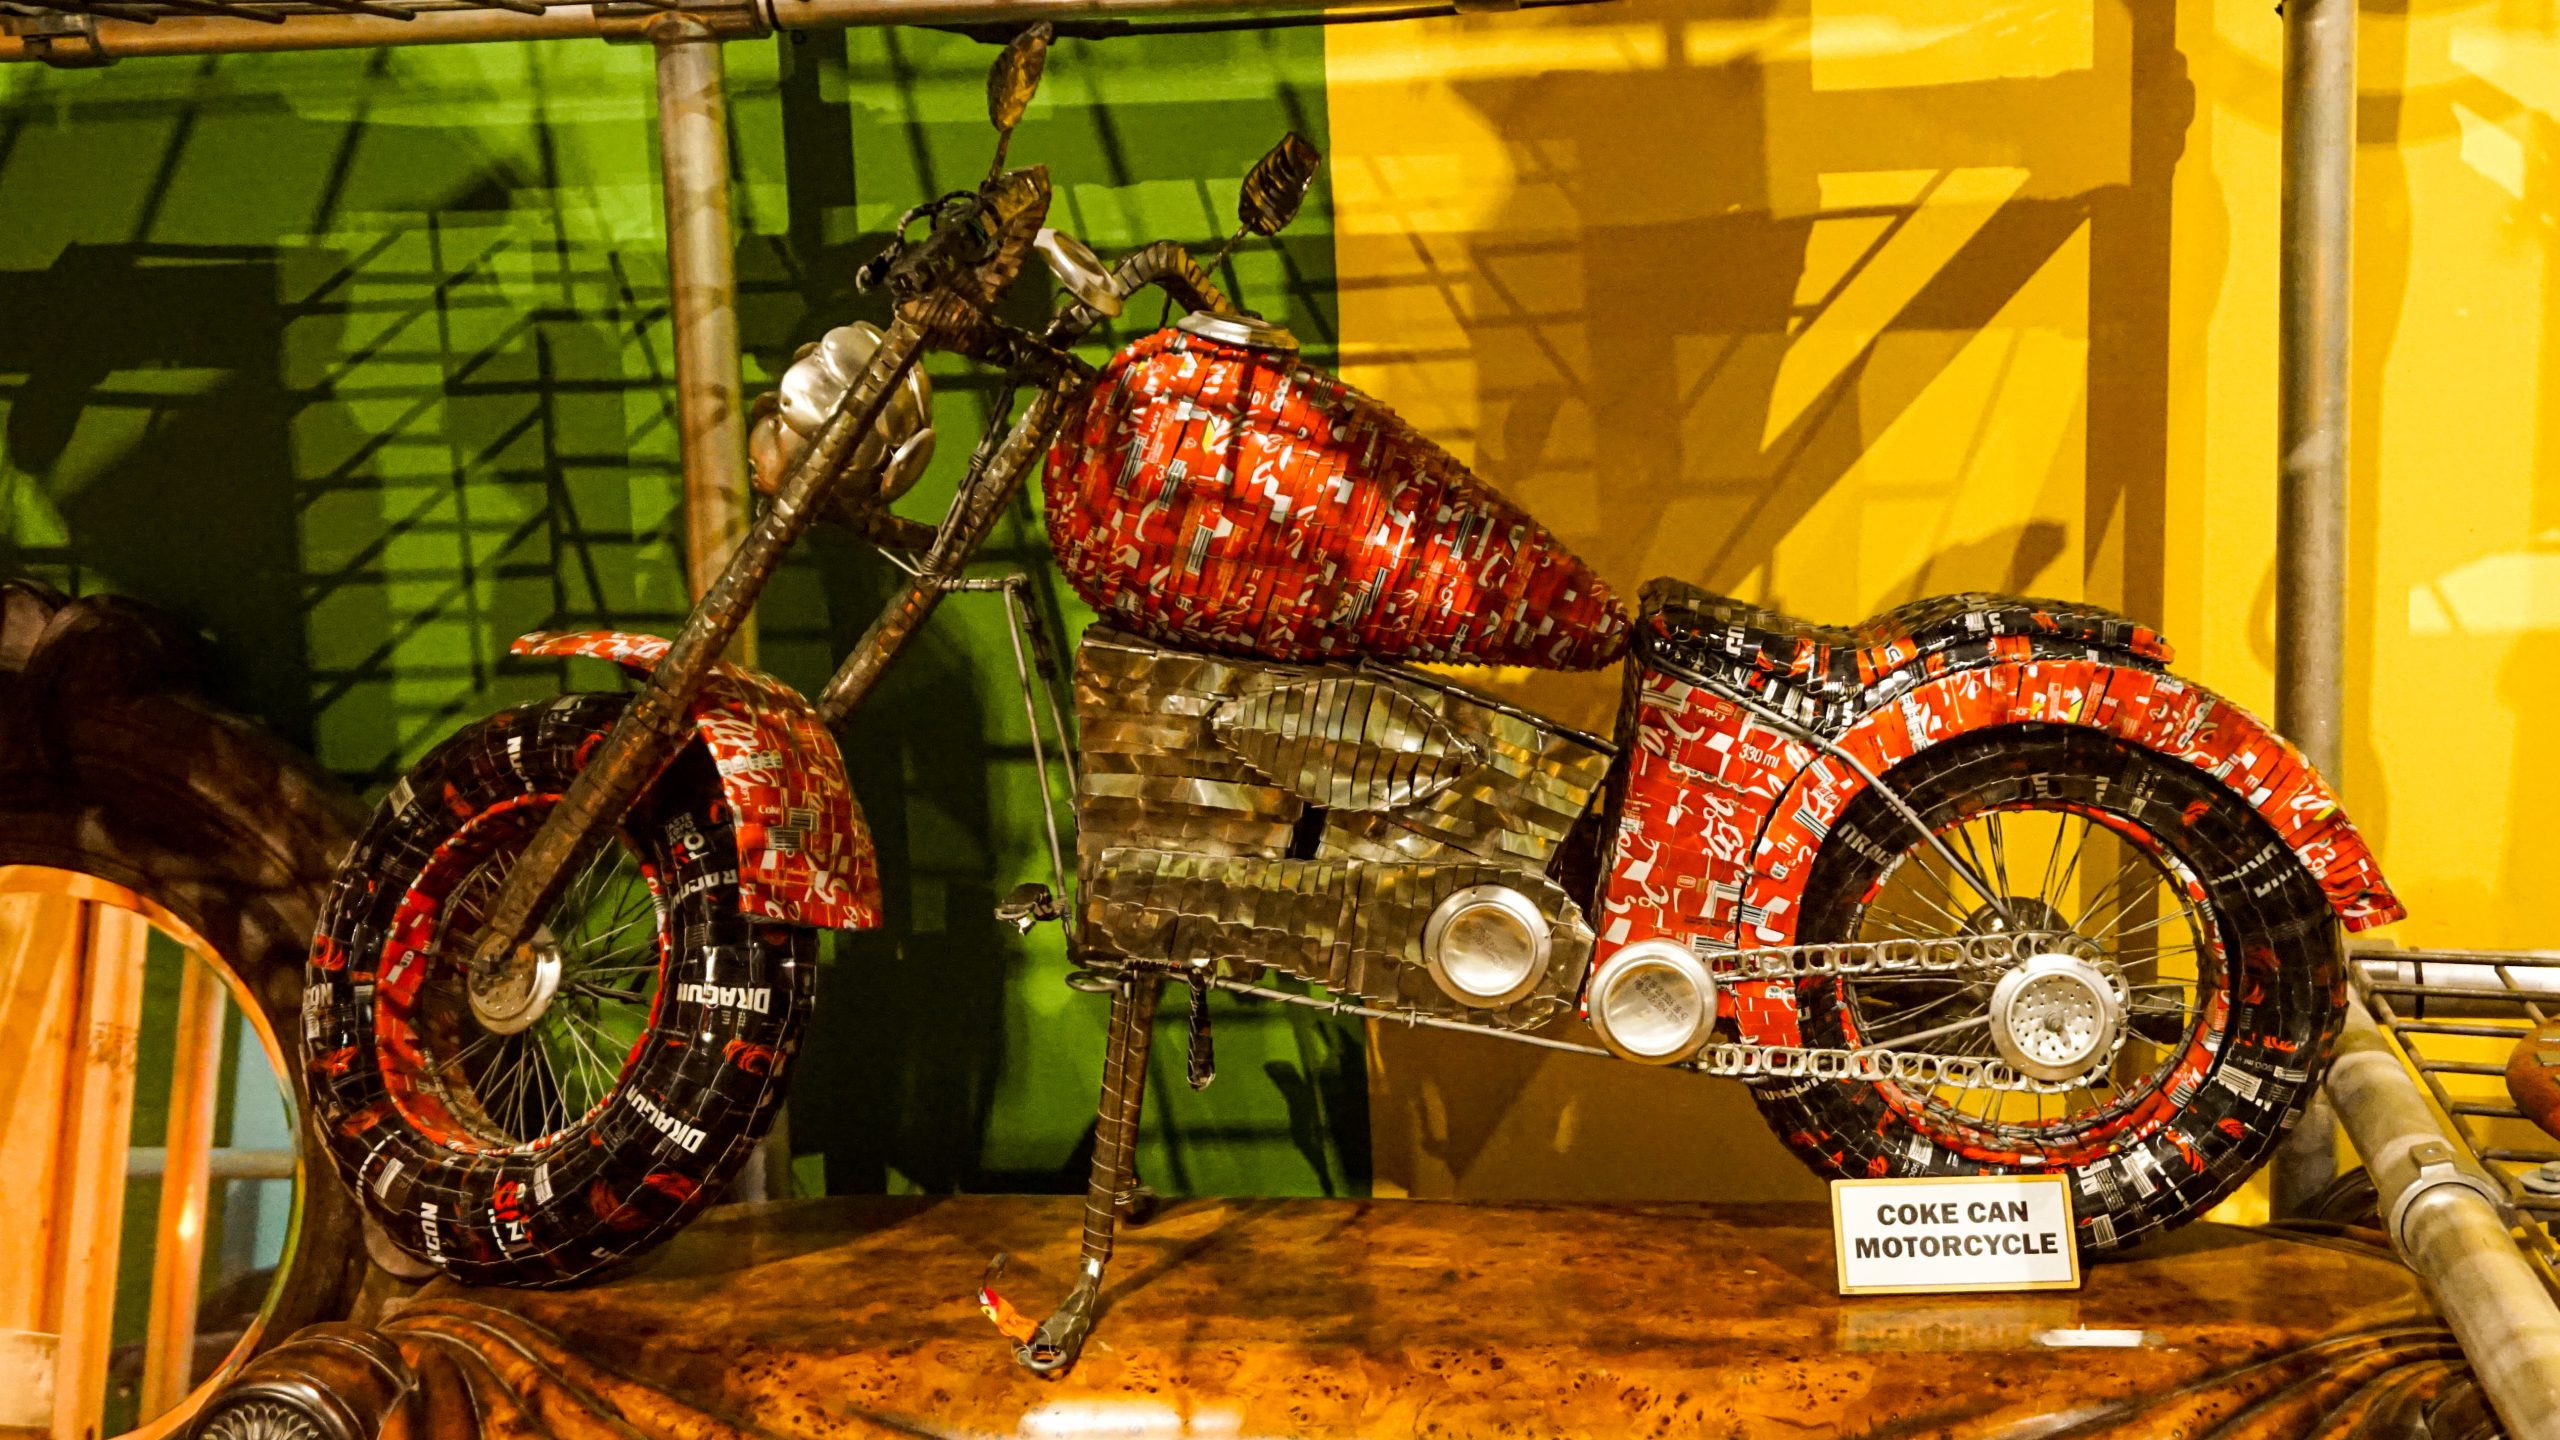 Motorcycle made of coke cans